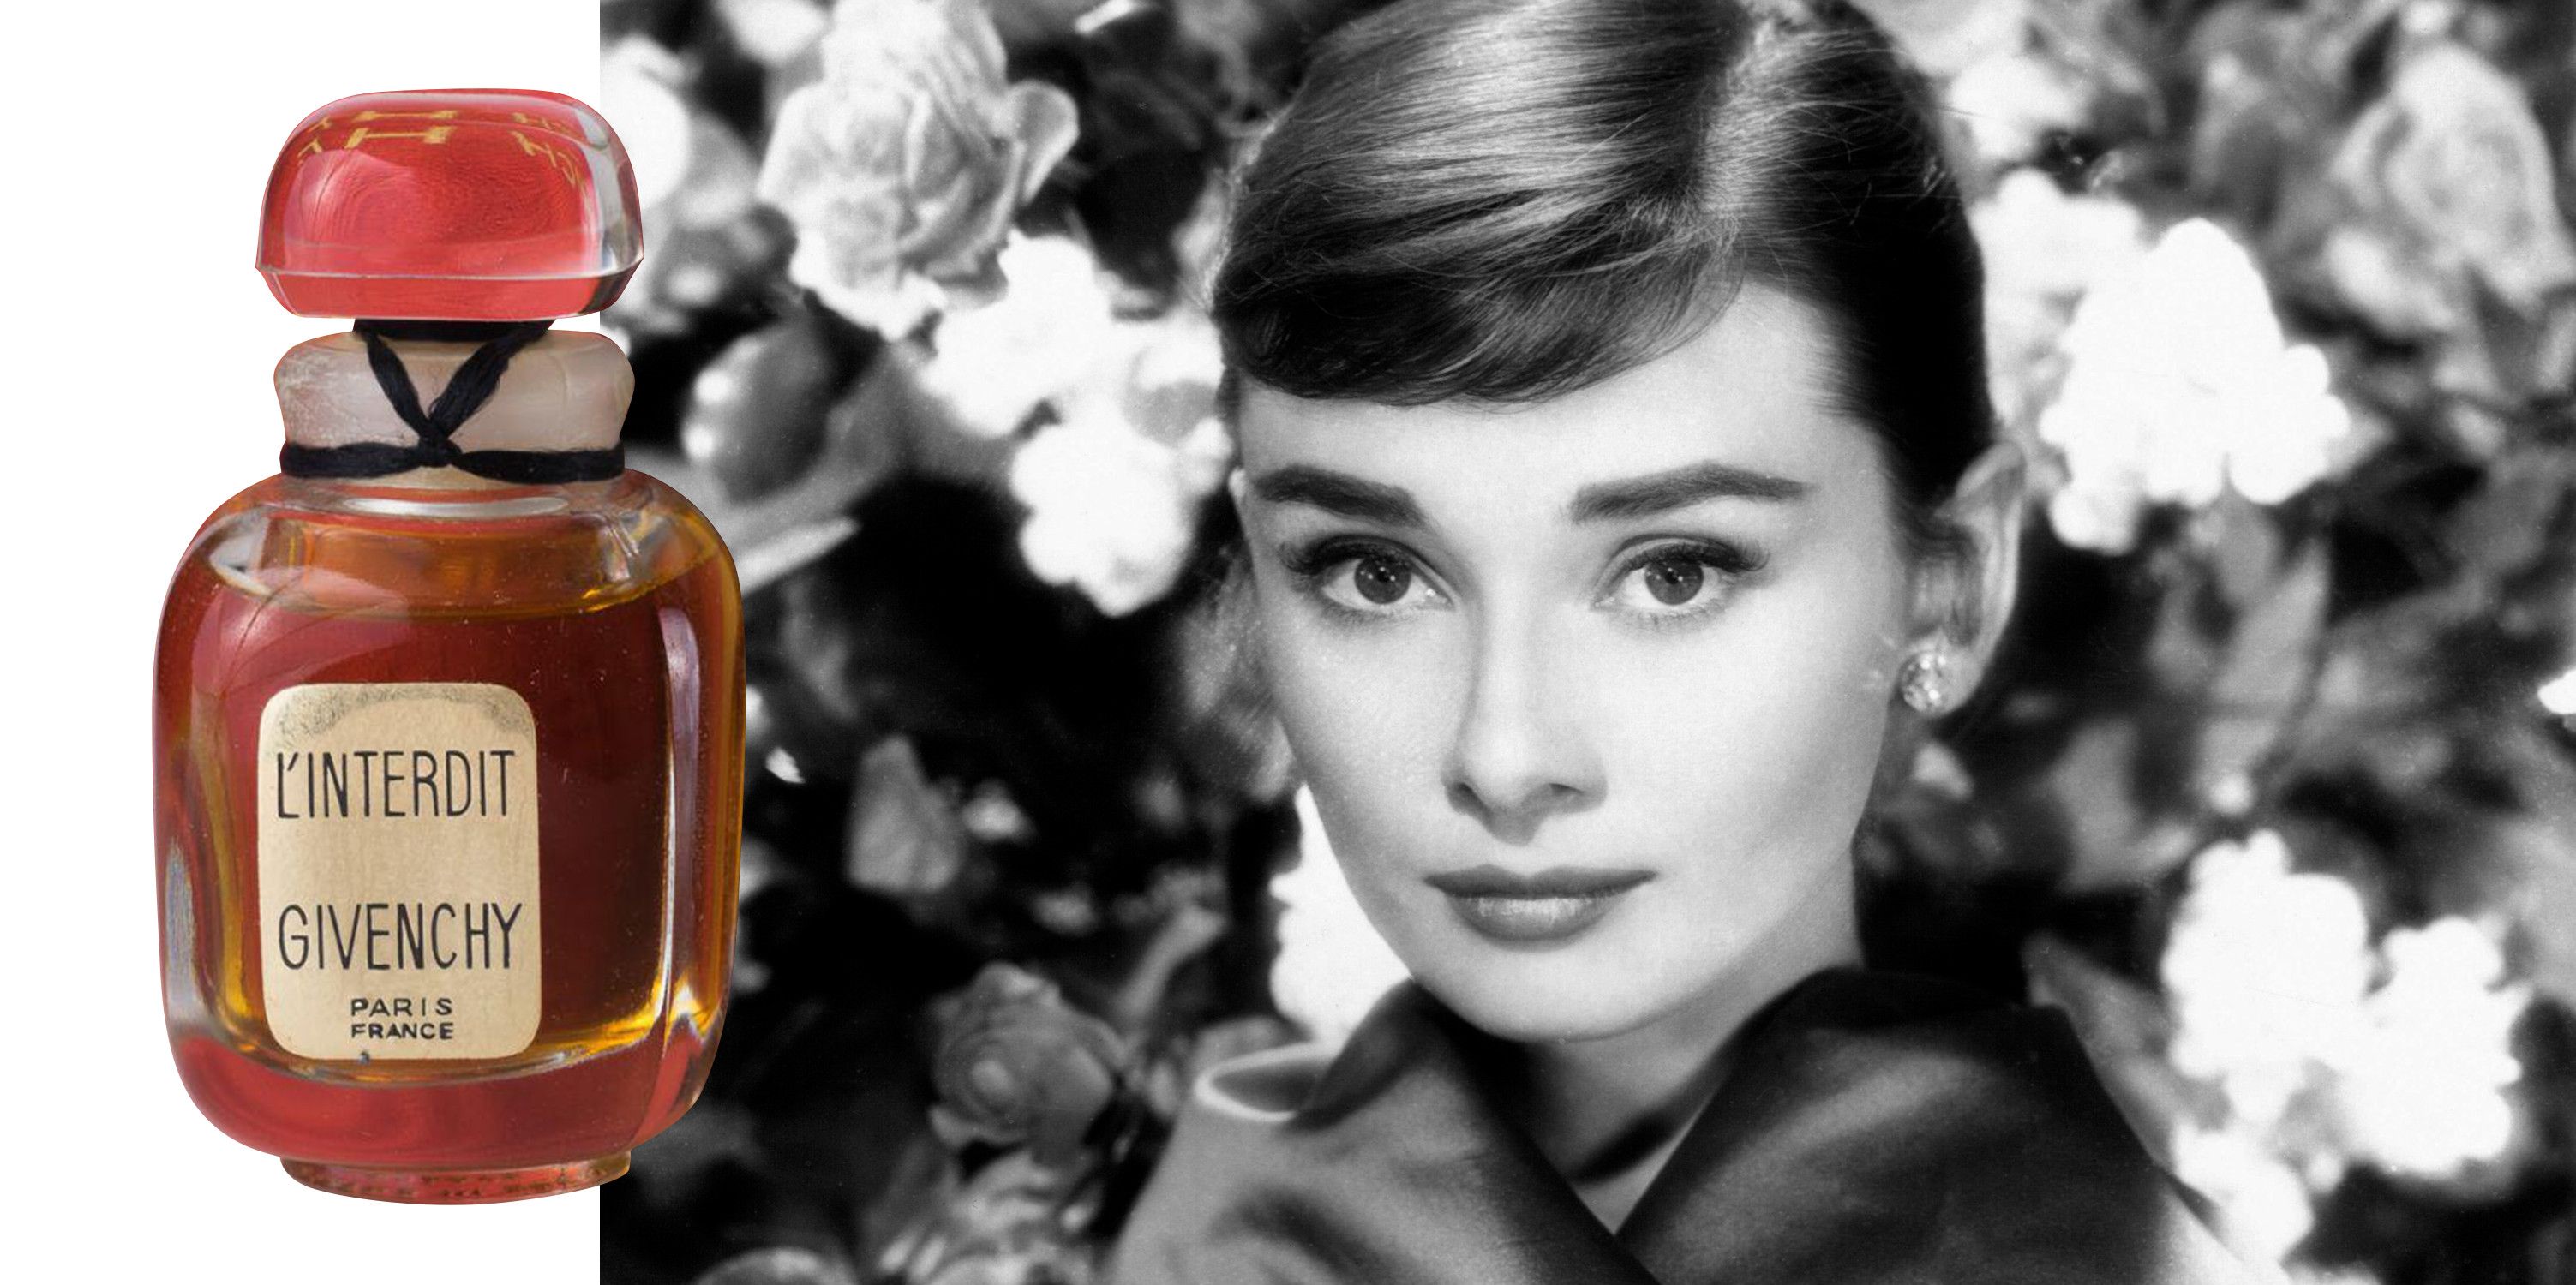 14 Famous Women and Their Favorite Perfumes, from Audrey Hepburn